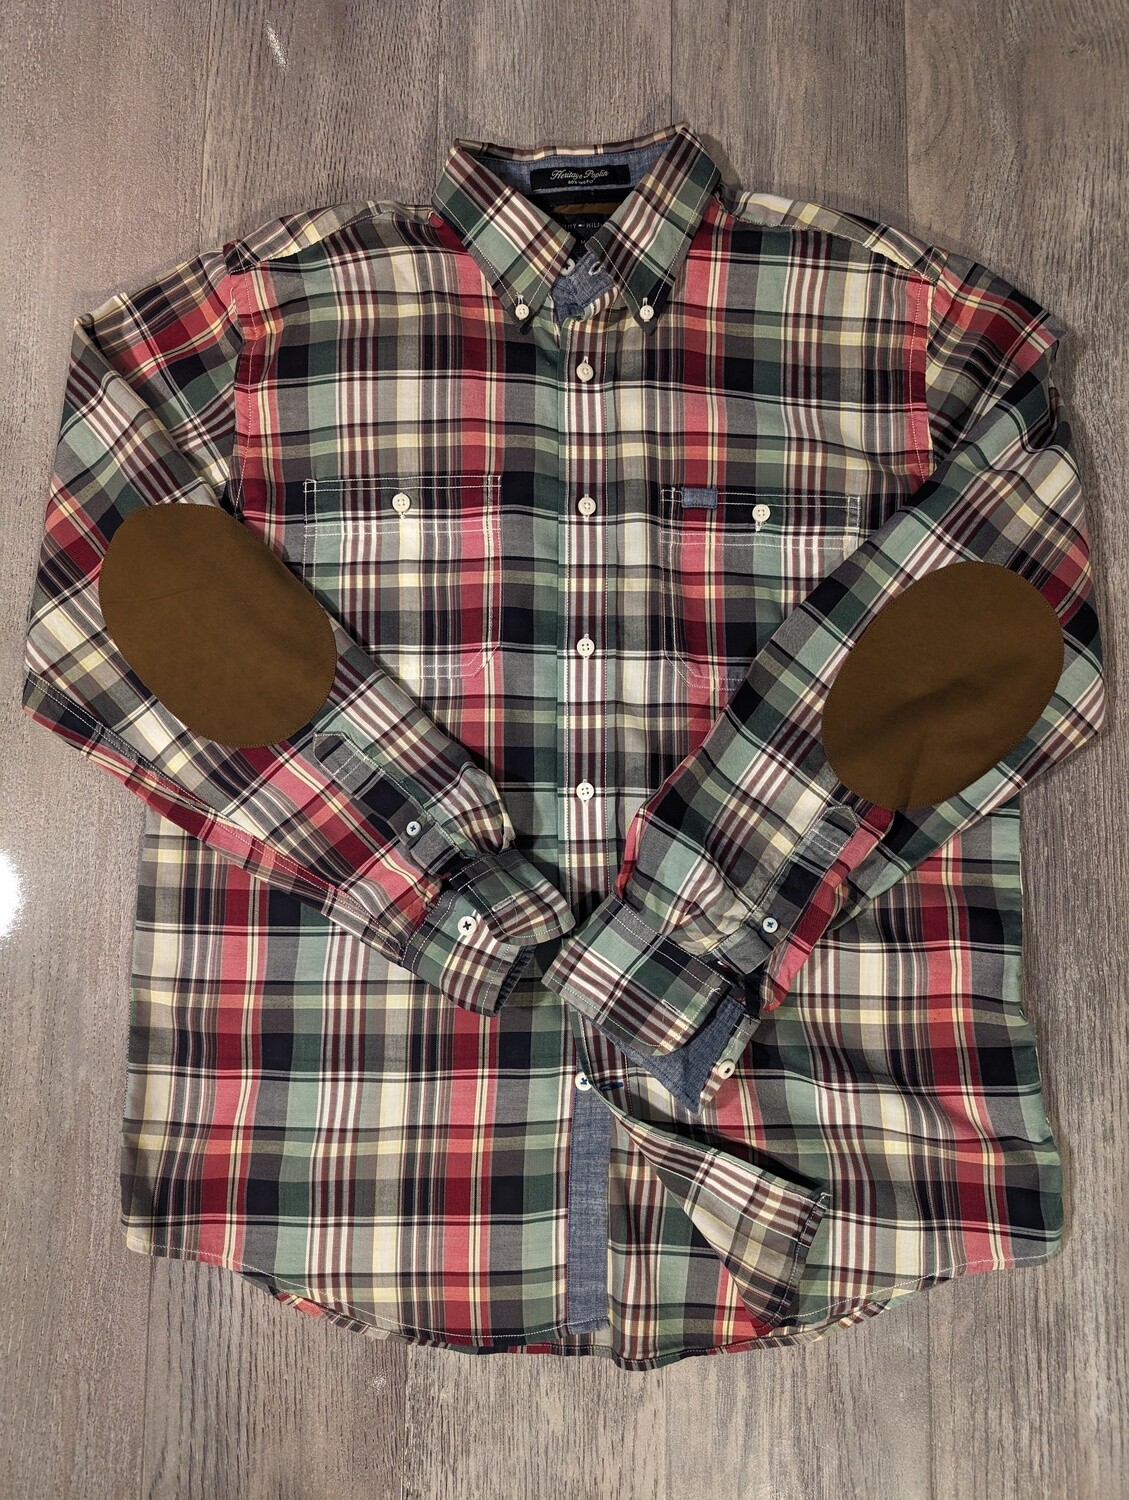 Tommy Hilfiger Heritage Poplin Plaid Long Sleeve Shirt with Brown Suede on the Elbows